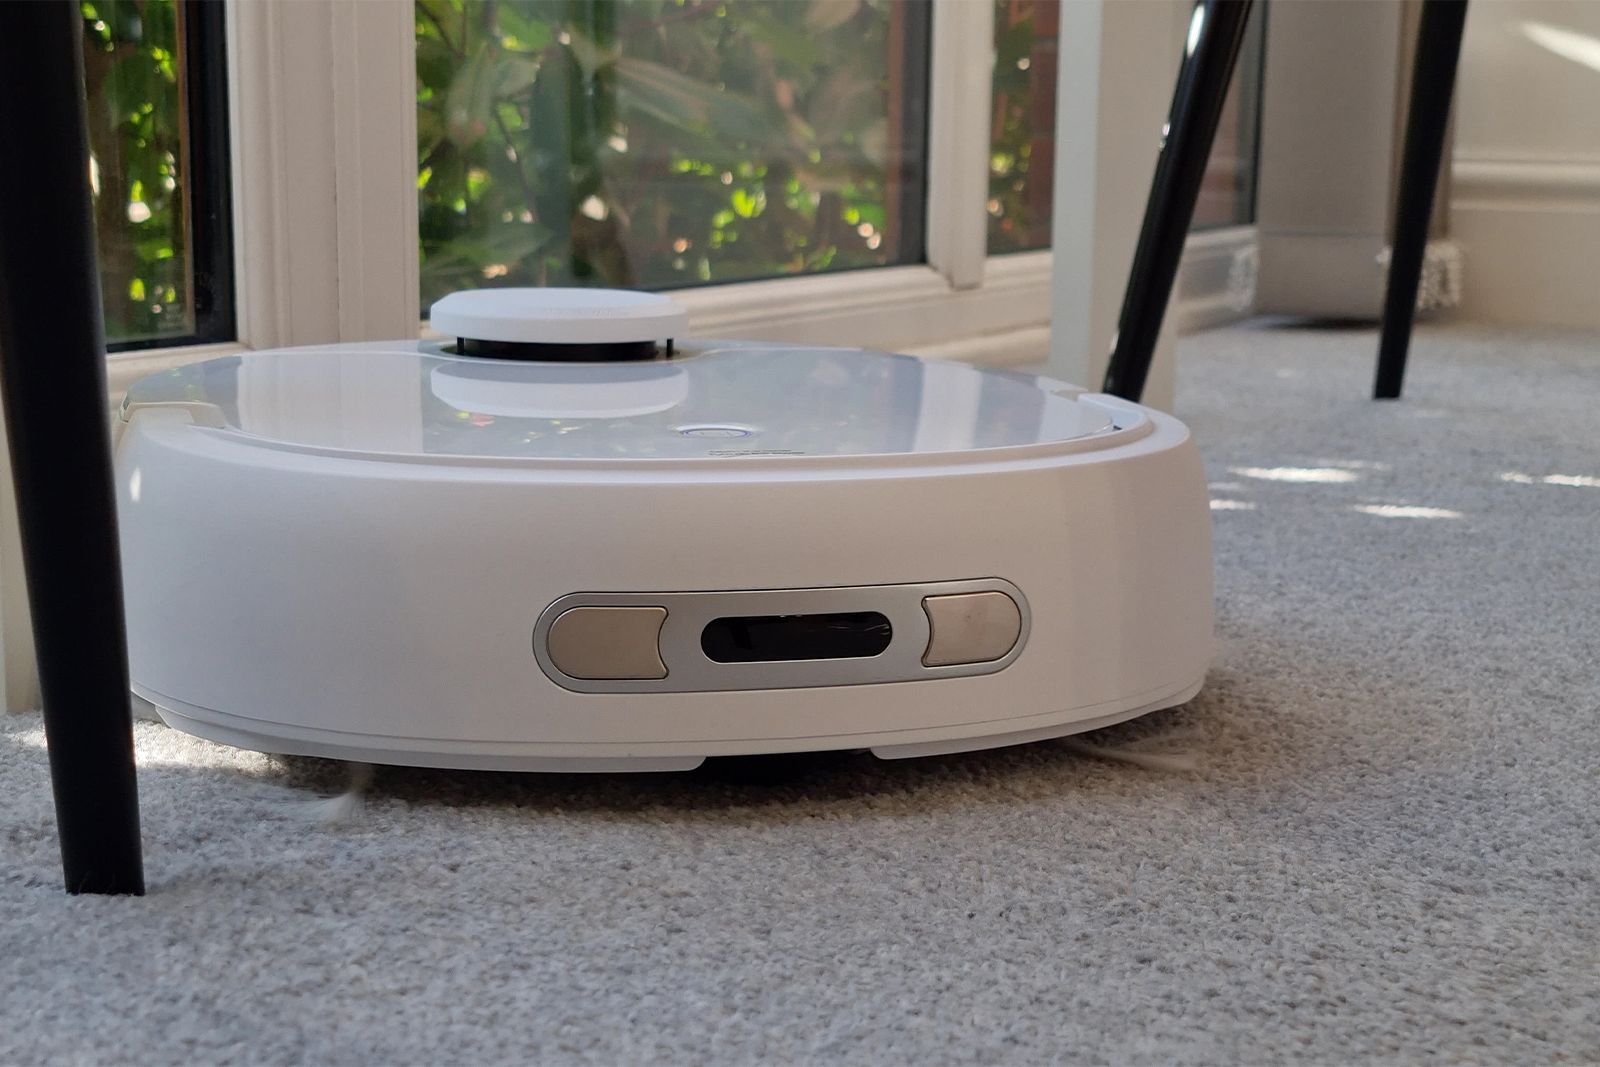 Narwal's superb T10 robot vacuum will keep your home sparkling clean photo 4